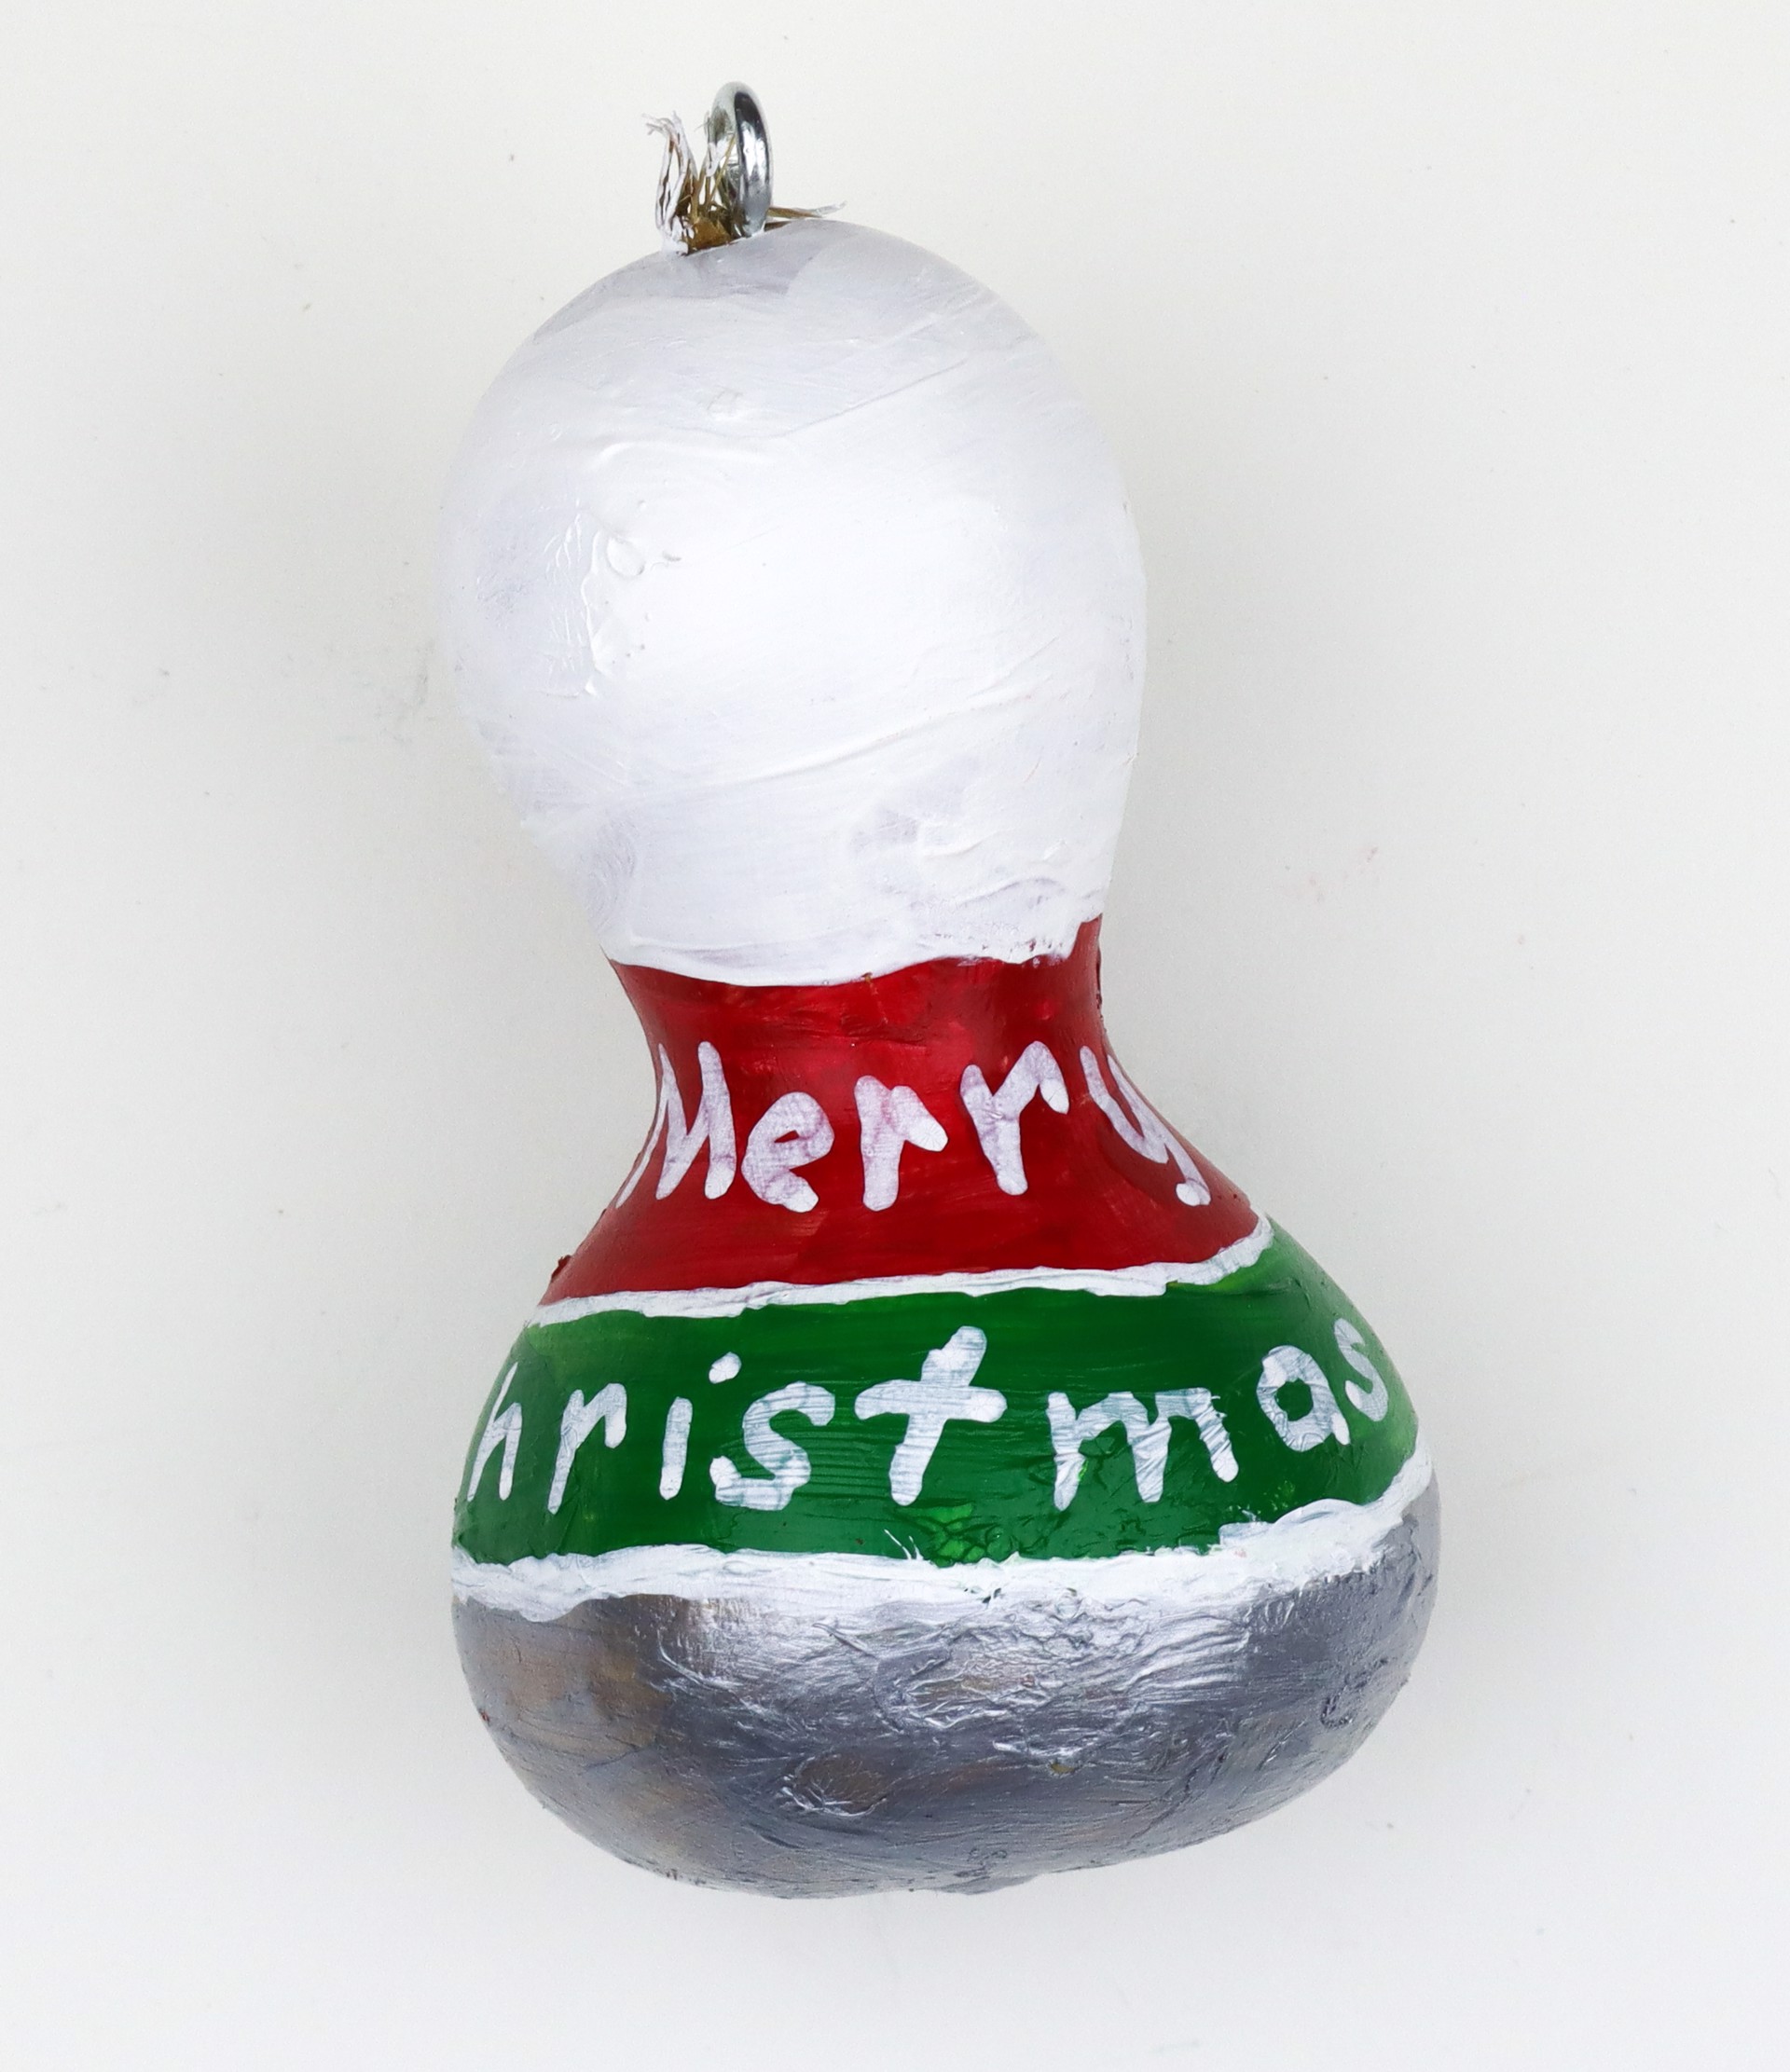 Merry Christmas (gourd ornament) by Eric Kendrick